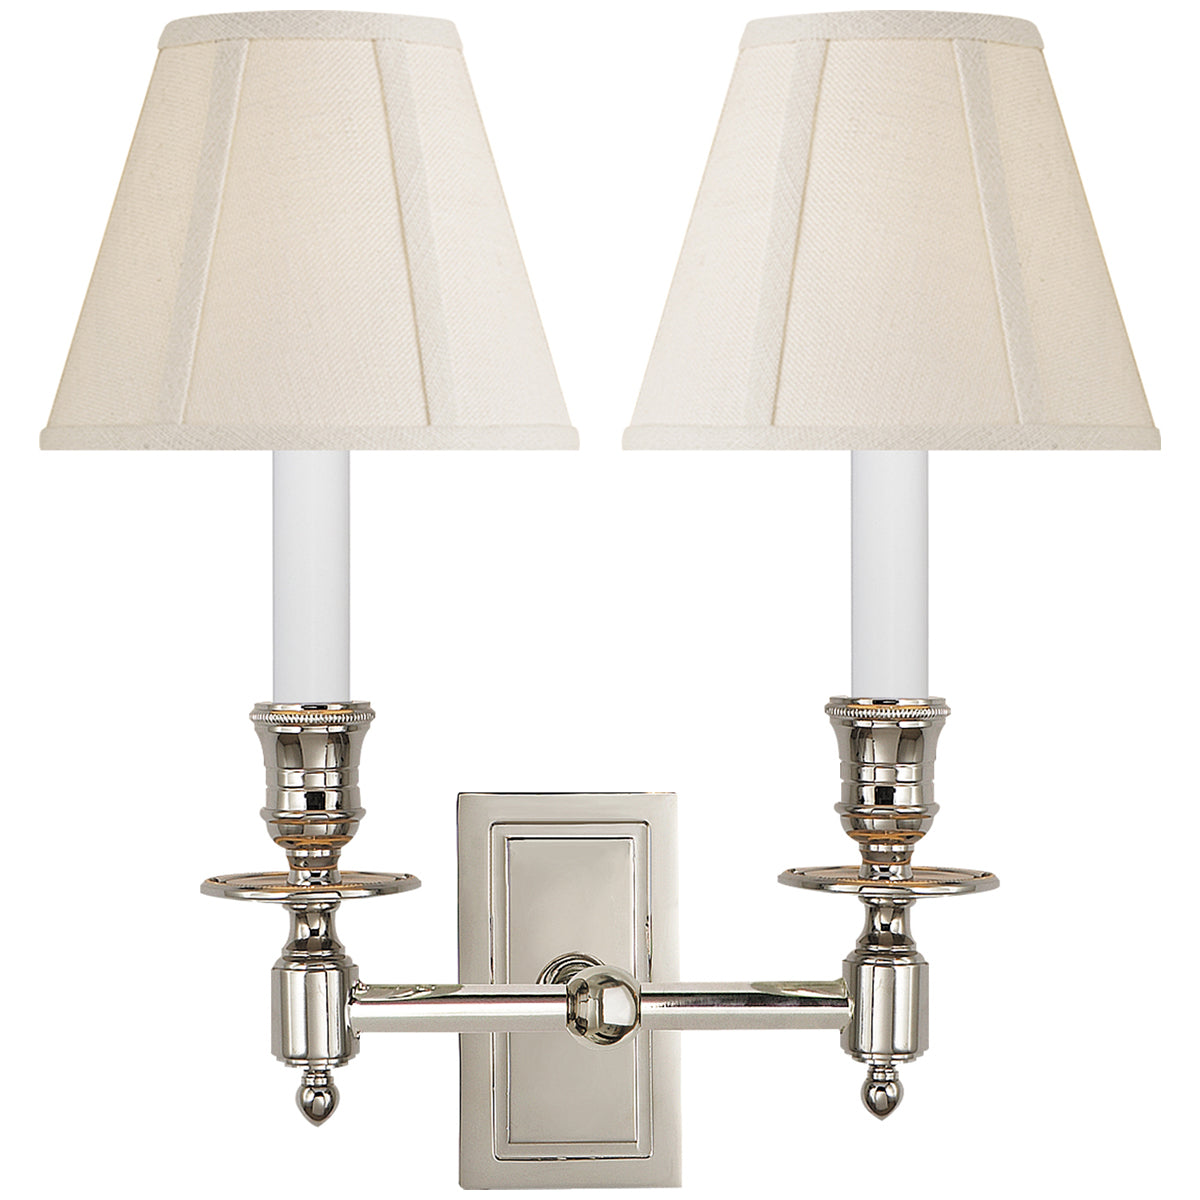 Visual Comfort French Double Library Sconce with Linen Shade